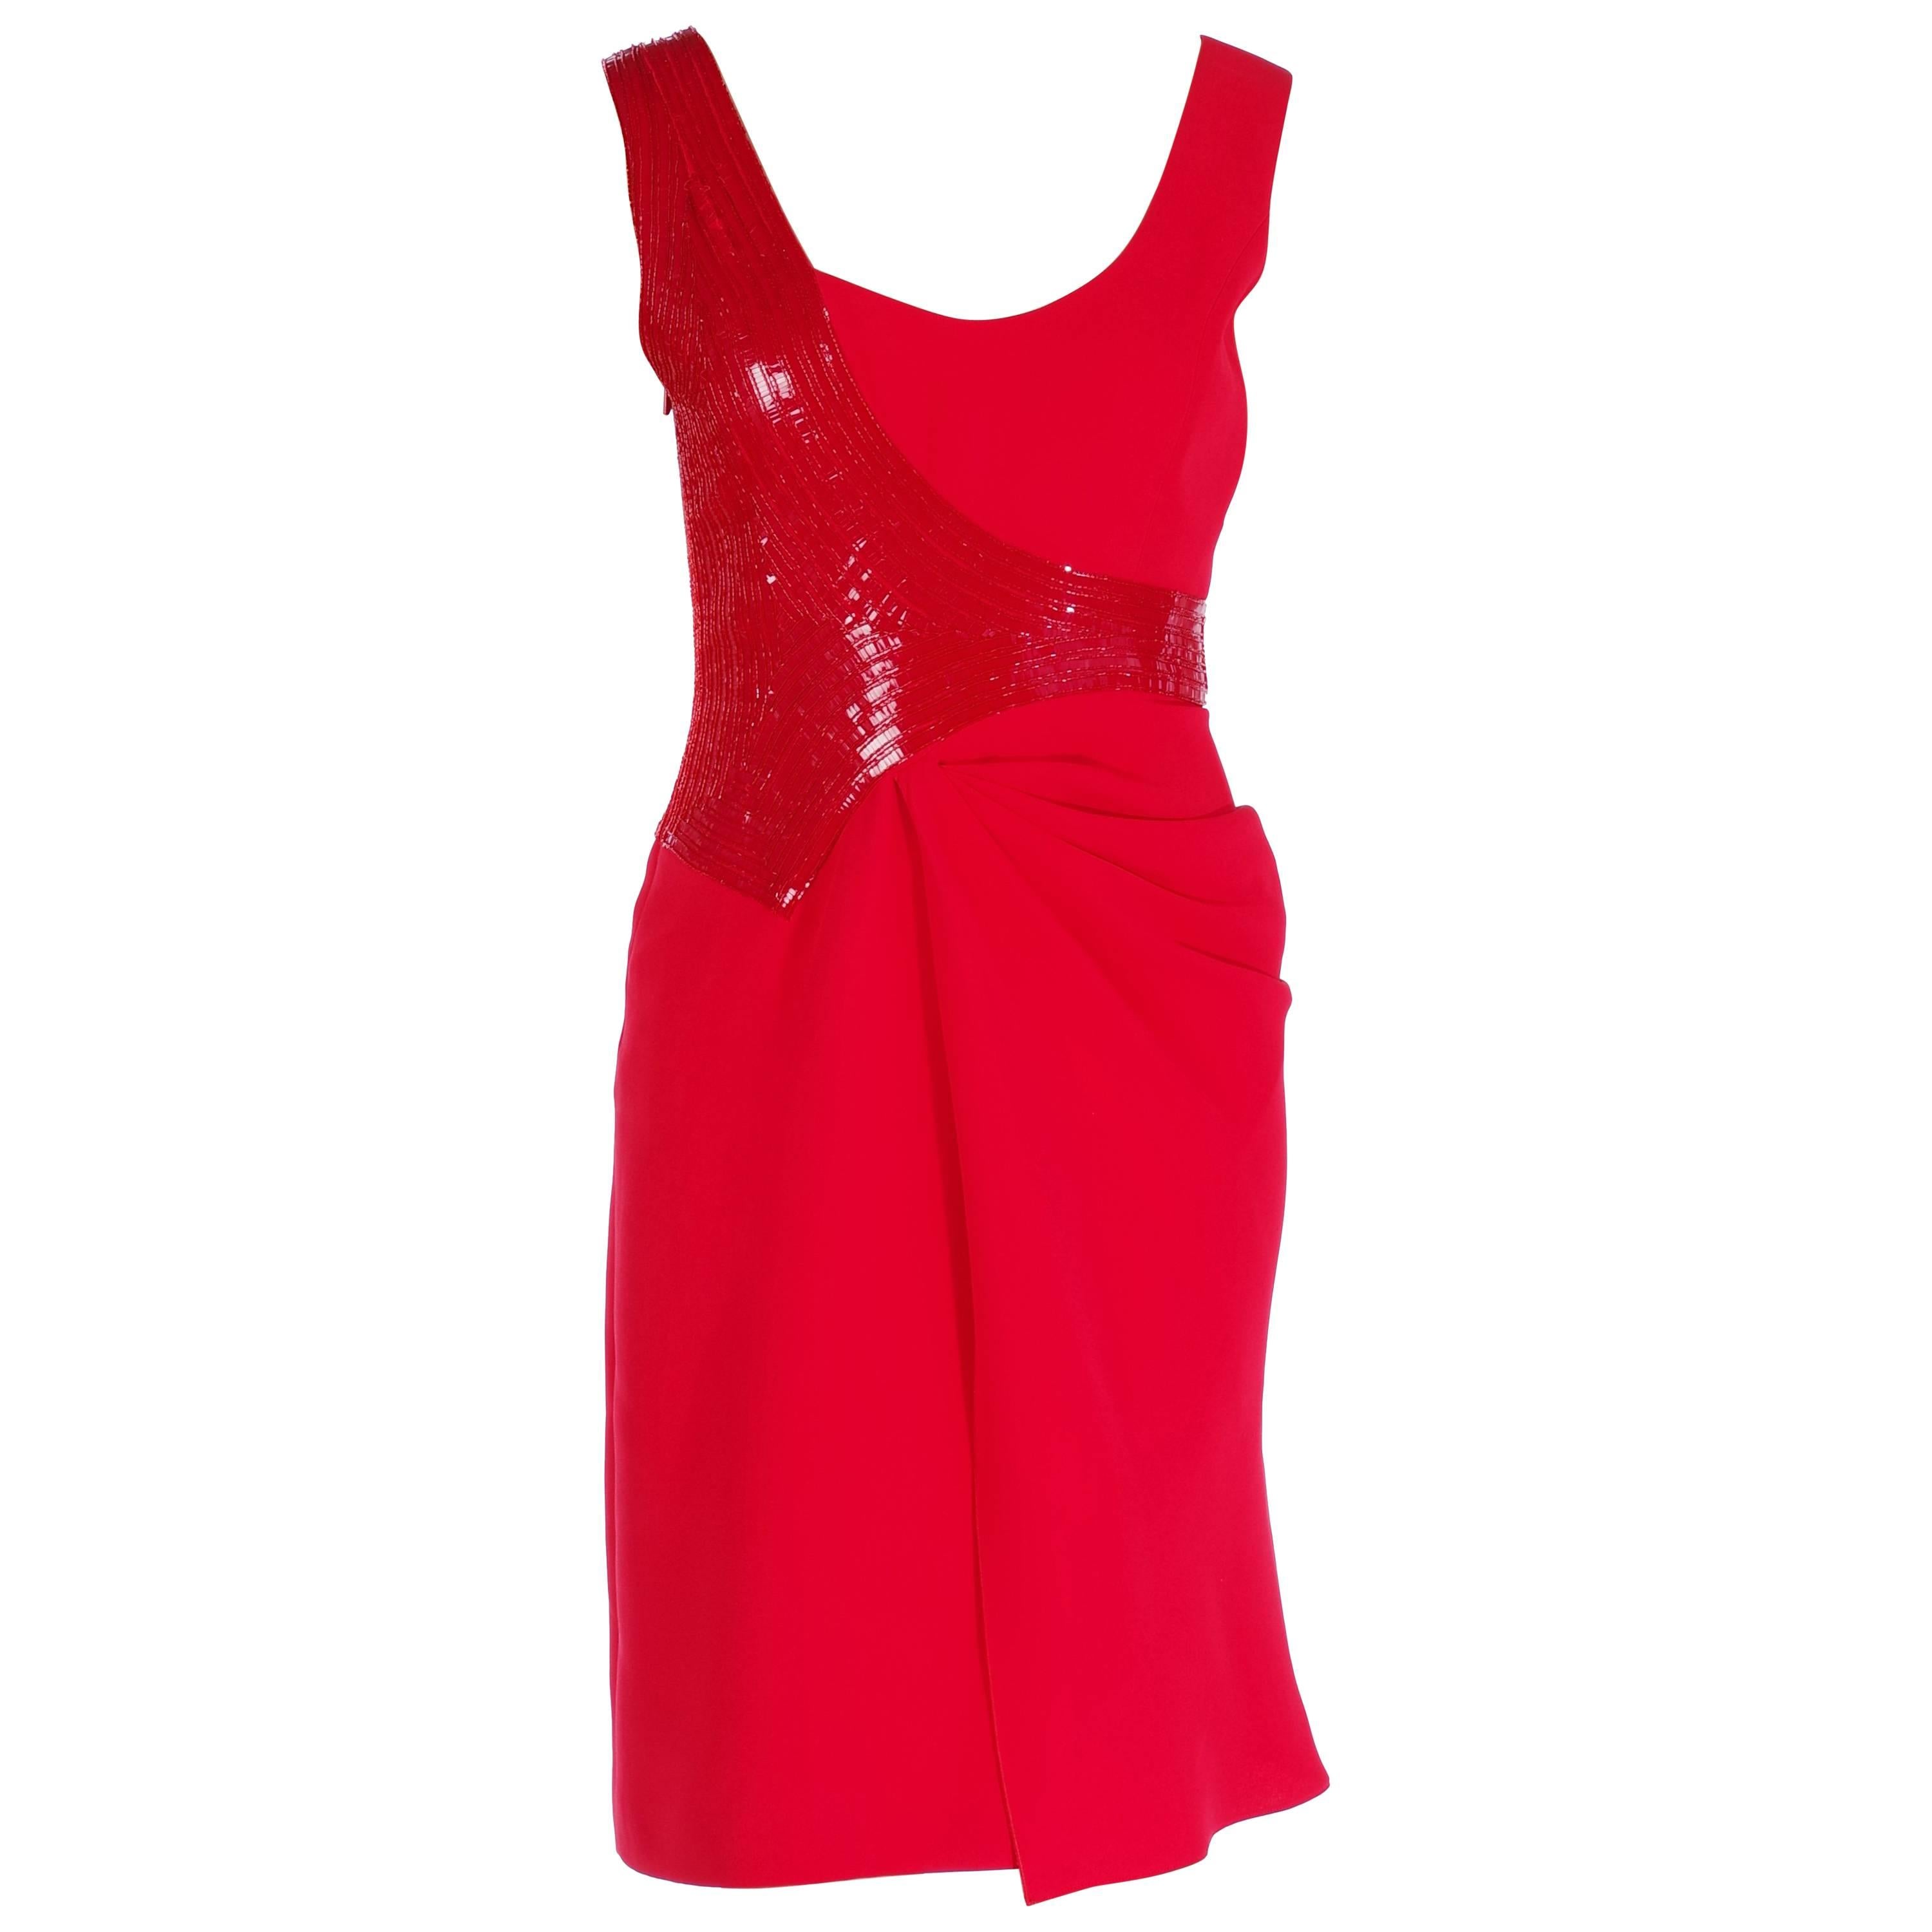 New VERSACE EMBELLISHED RED DRESS 40, 46